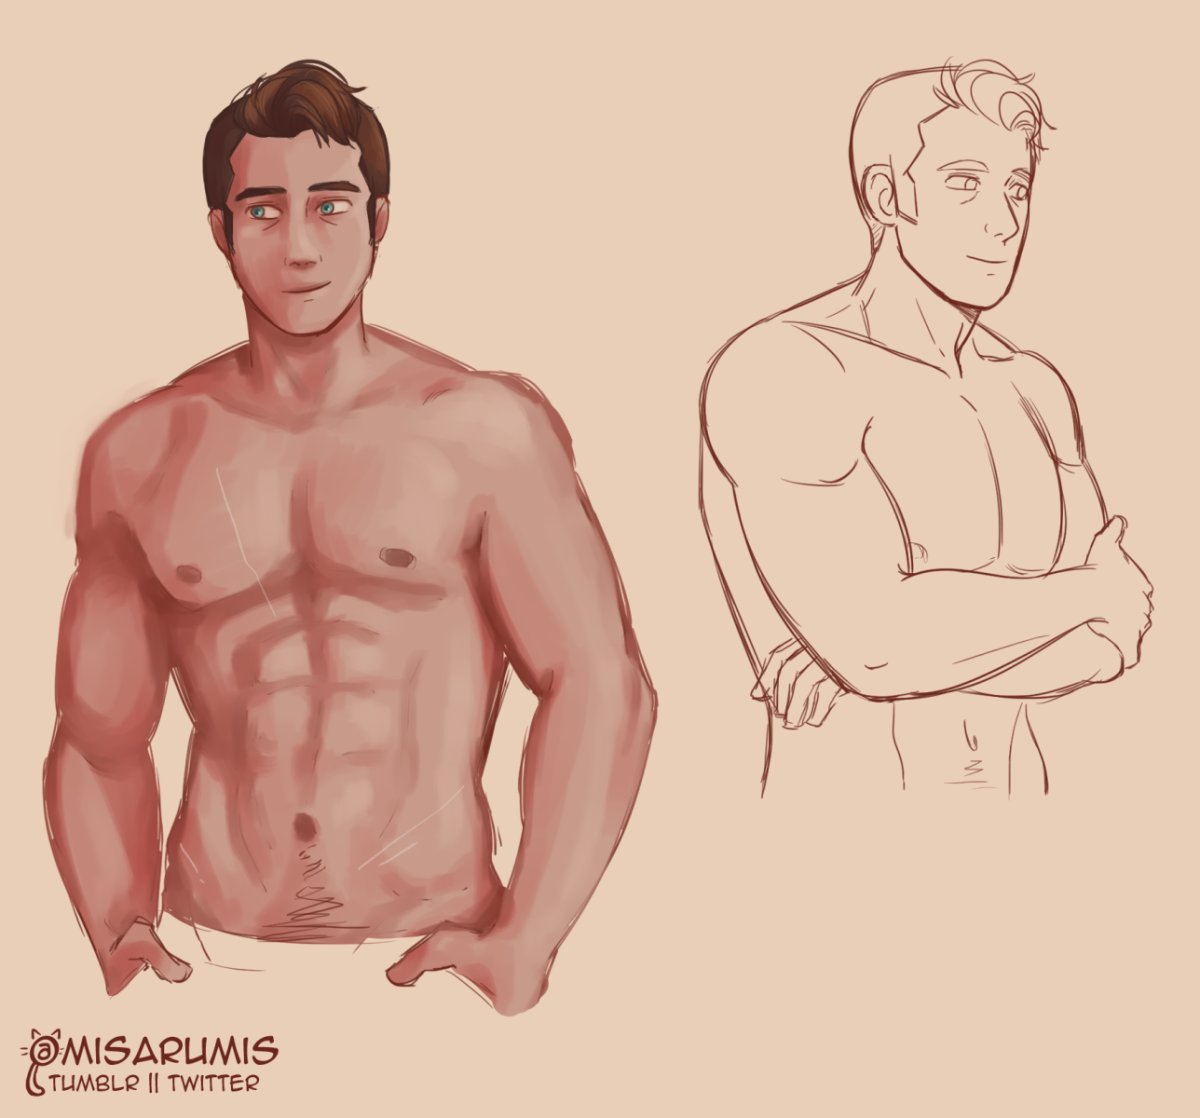 How to draw a shirtless man?